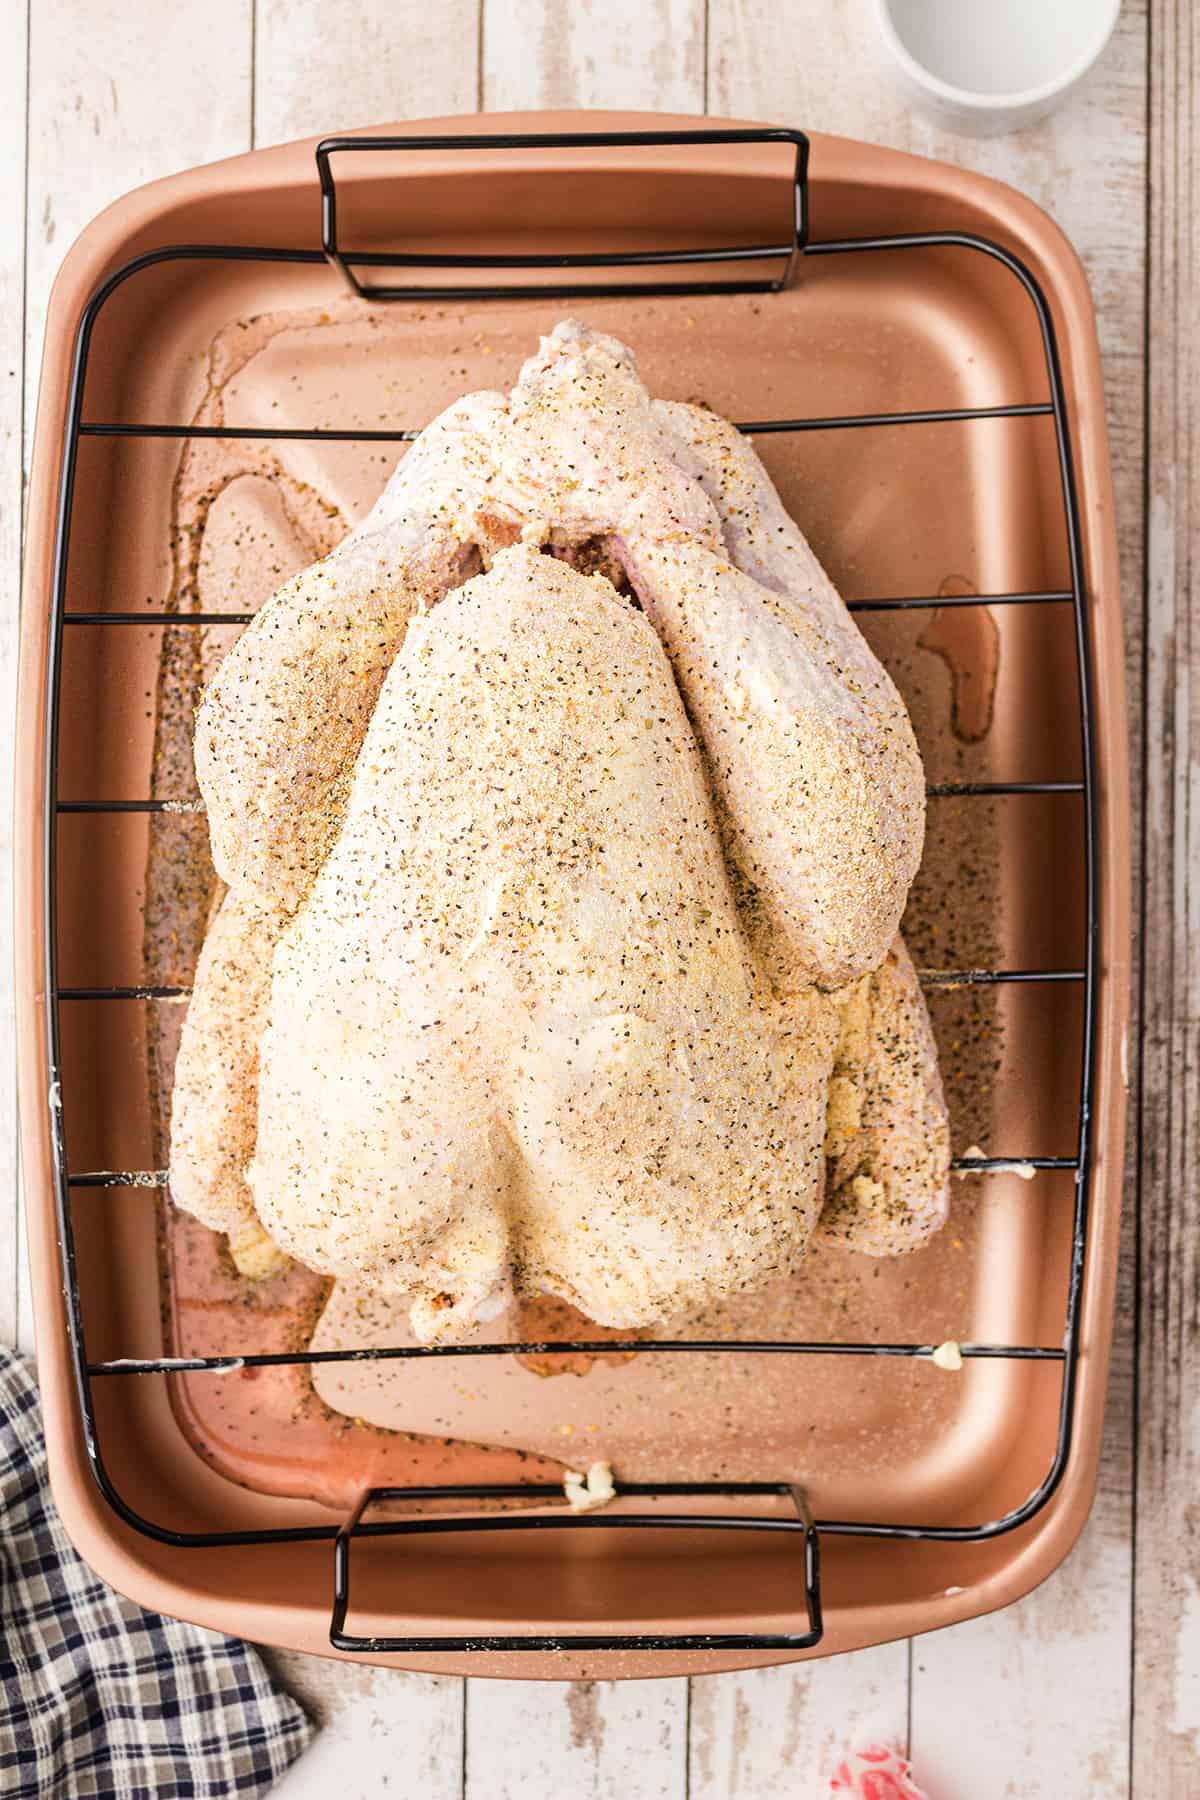 Turkey in roasting pan coated with butter and seasoned salt.